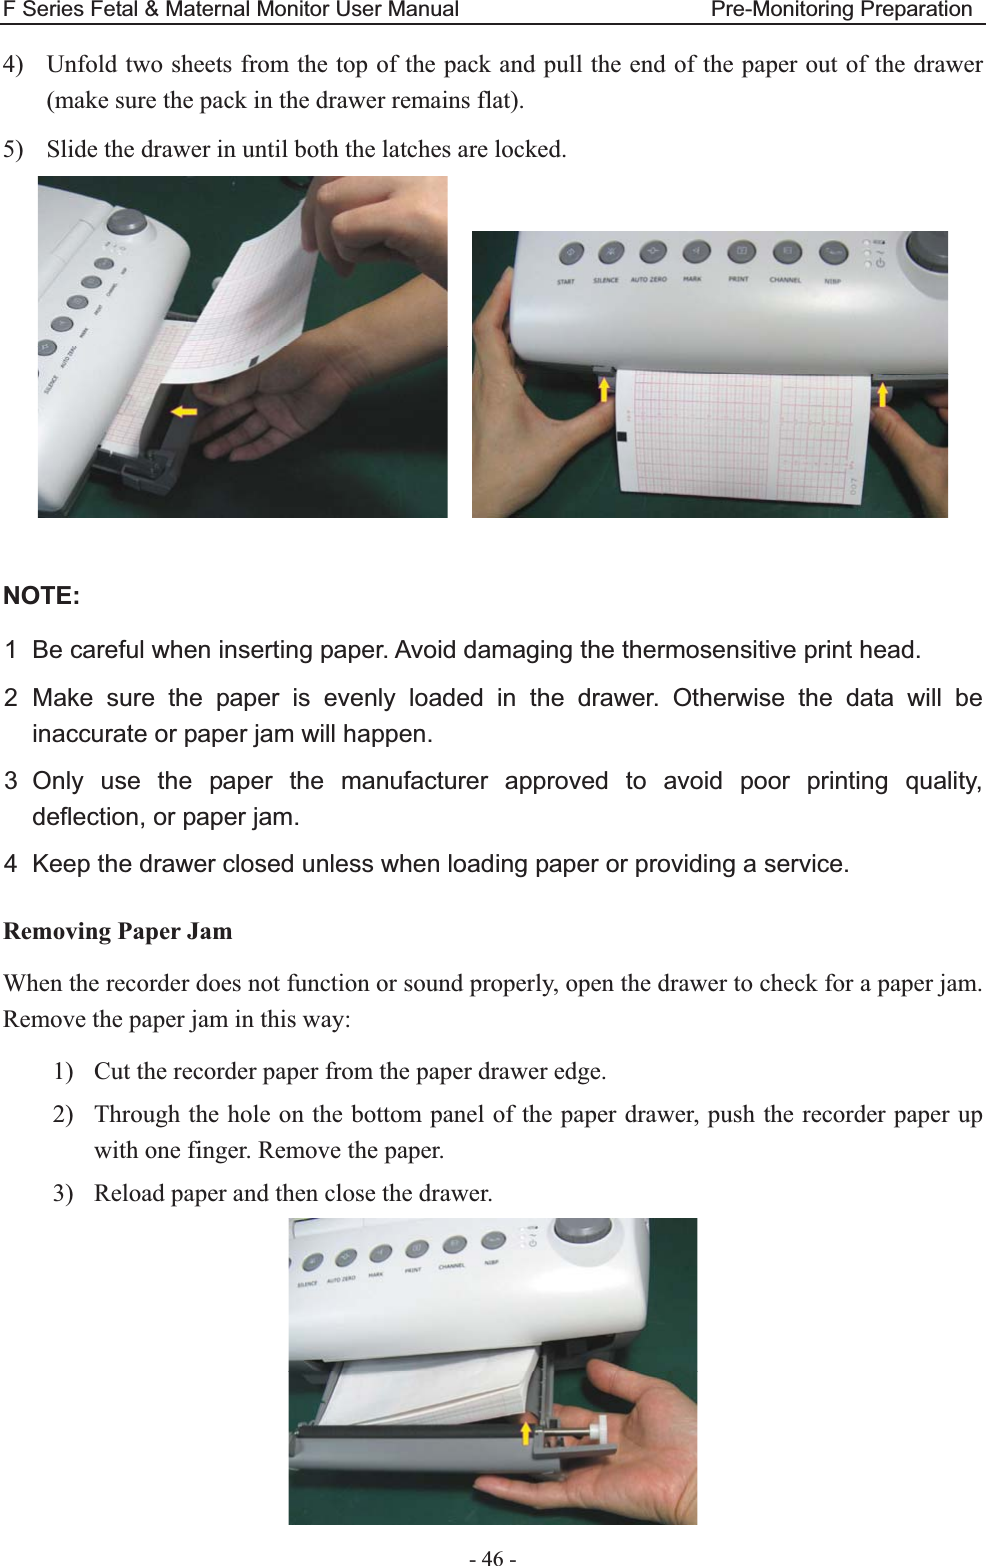 F Series Fetal &amp; Maternal Monitor User Manual                       Pre-Monitoring Preparation - 46 - 4) Unfold two sheets from the top of the pack and pull the end of the paper out of the drawer (make sure the pack in the drawer remains flat). 5) Slide the drawer in until both the latches are locked.      NOTE:1  Be careful when inserting paper. Avoid damaging the thermosensitive print head. 2 Make sure the paper is evenly loaded in the drawer. Otherwise the data will be inaccurate or paper jam will happen. 3 Only use the paper the manufacturer approved to avoid poor printing quality, deflection, or paper jam. 4  Keep the drawer closed unless when loading paper or providing a service. Removing Paper Jam When the recorder does not function or sound properly, open the drawer to check for a paper jam. Remove the paper jam in this way: 1) Cut the recorder paper from the paper drawer edge. 2) Through the hole on the bottom panel of the paper drawer, push the recorder paper up with one finger. Remove the paper. 3) Reload paper and then close the drawer.  